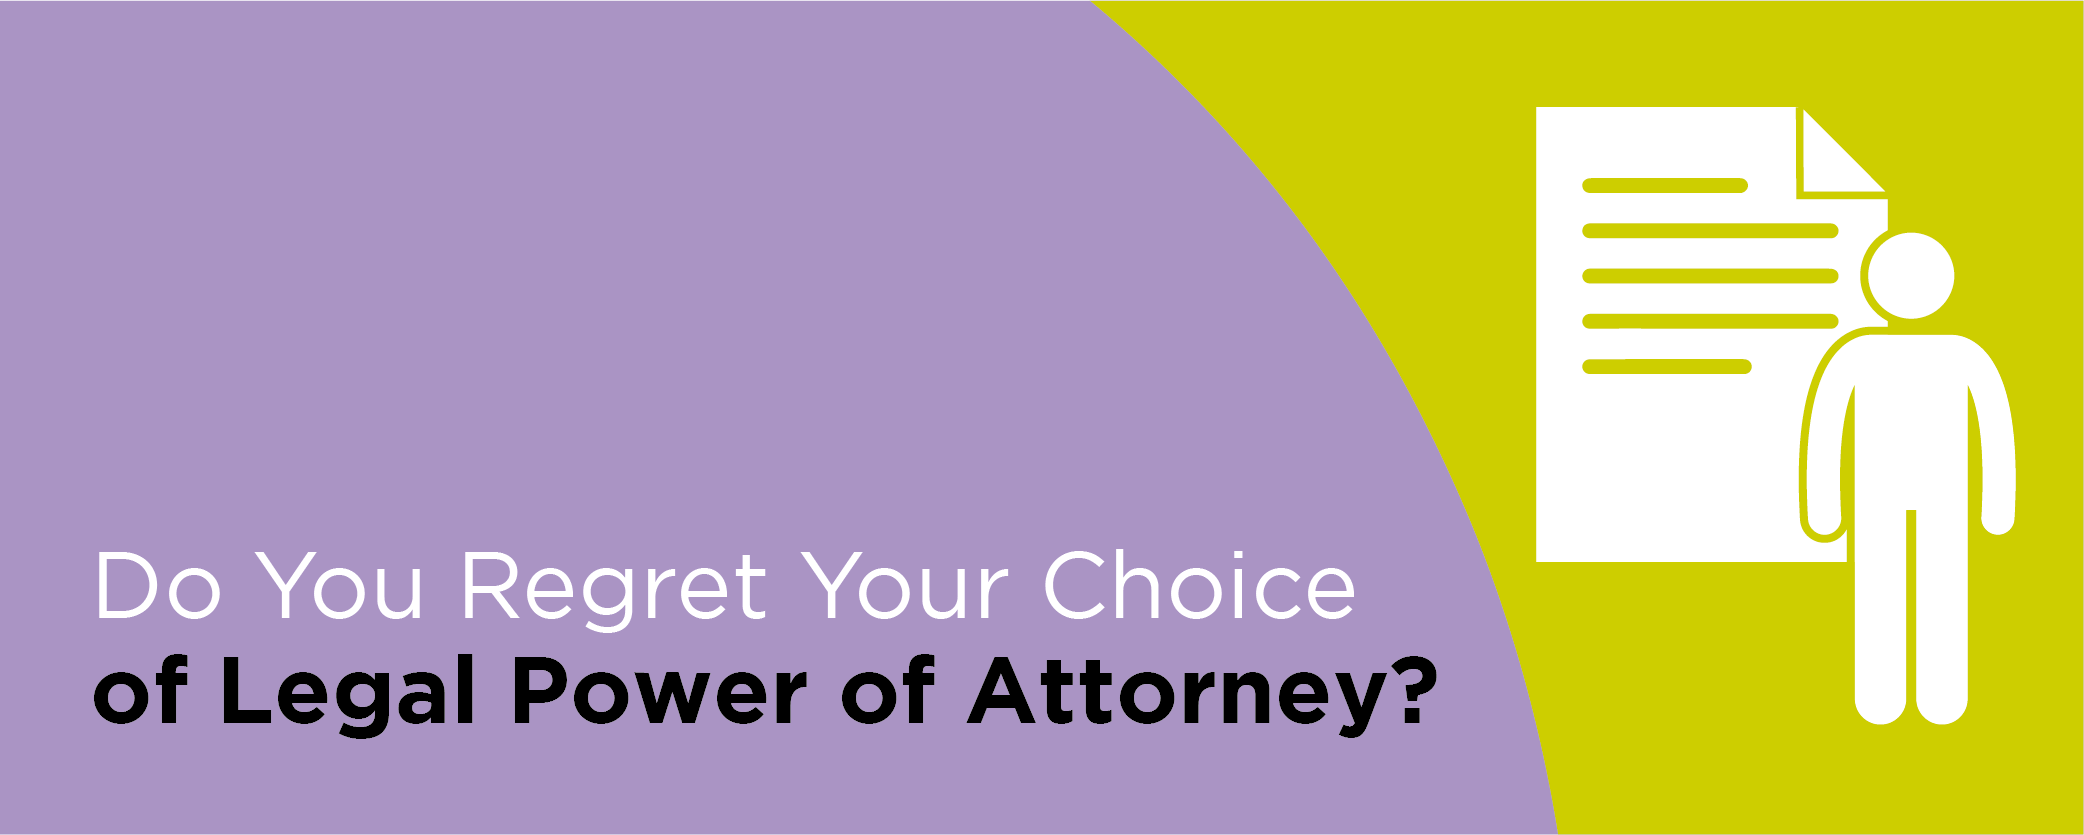 Do You Regret Your Choice of Legal Power of Attorney?